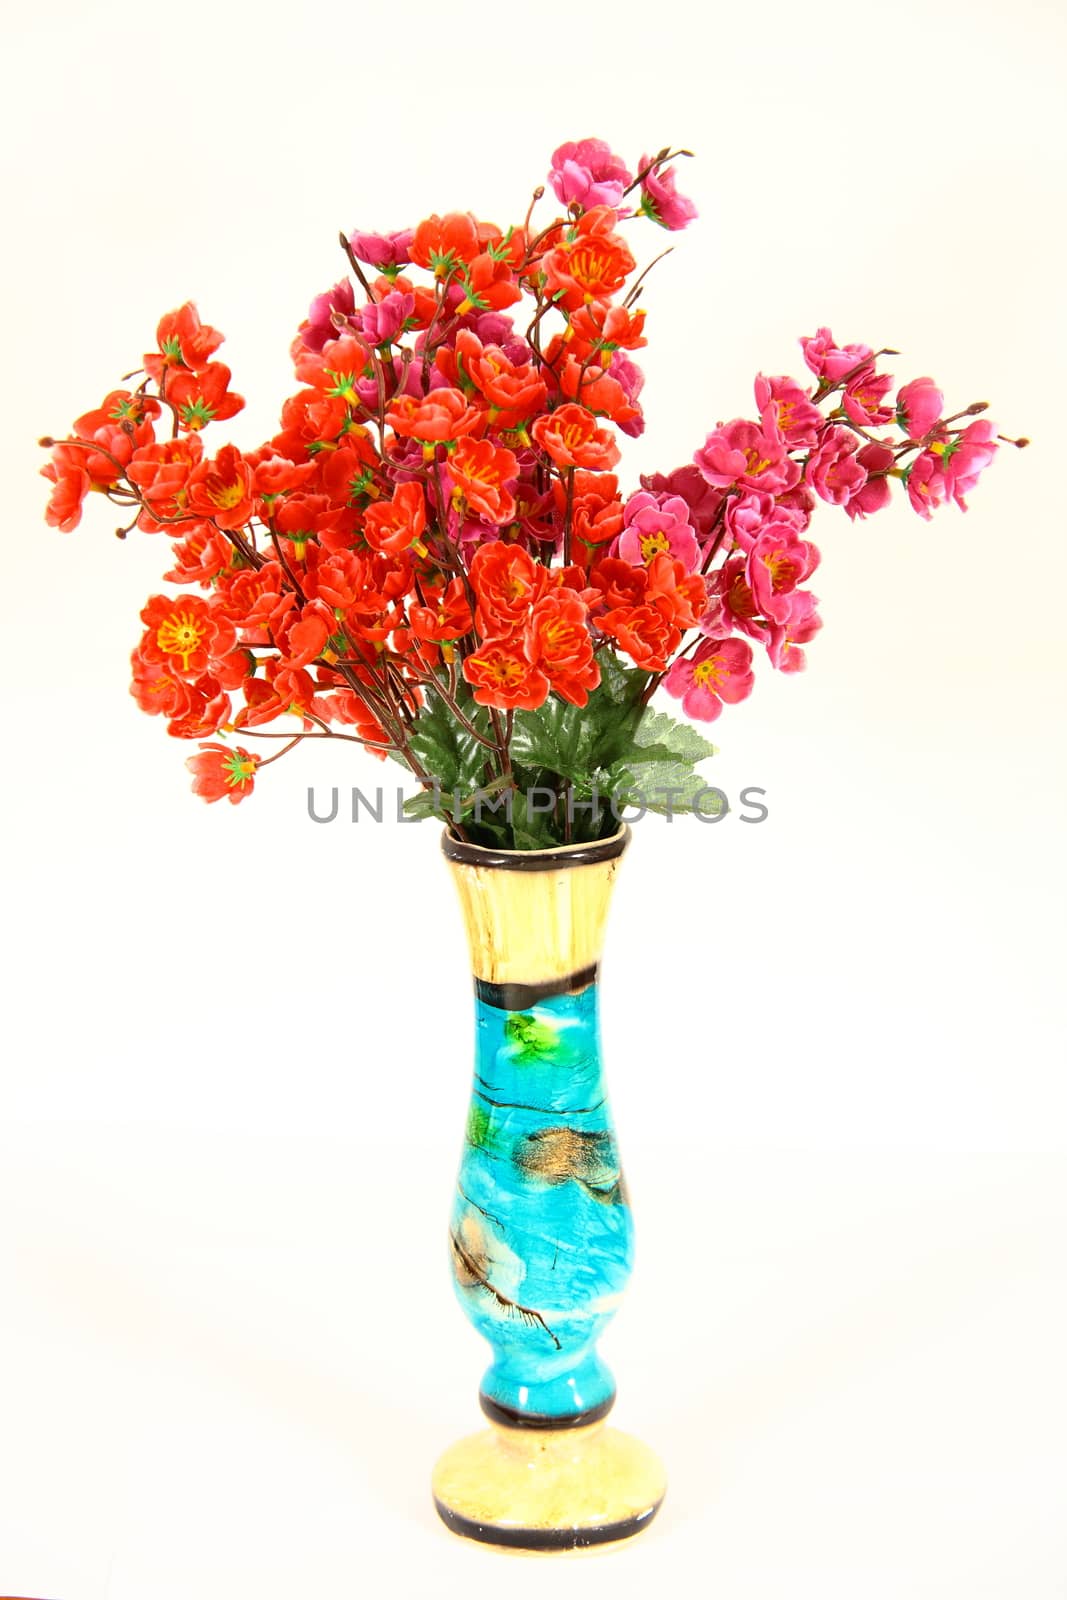 artistic vase with flowers  by mturhanlar